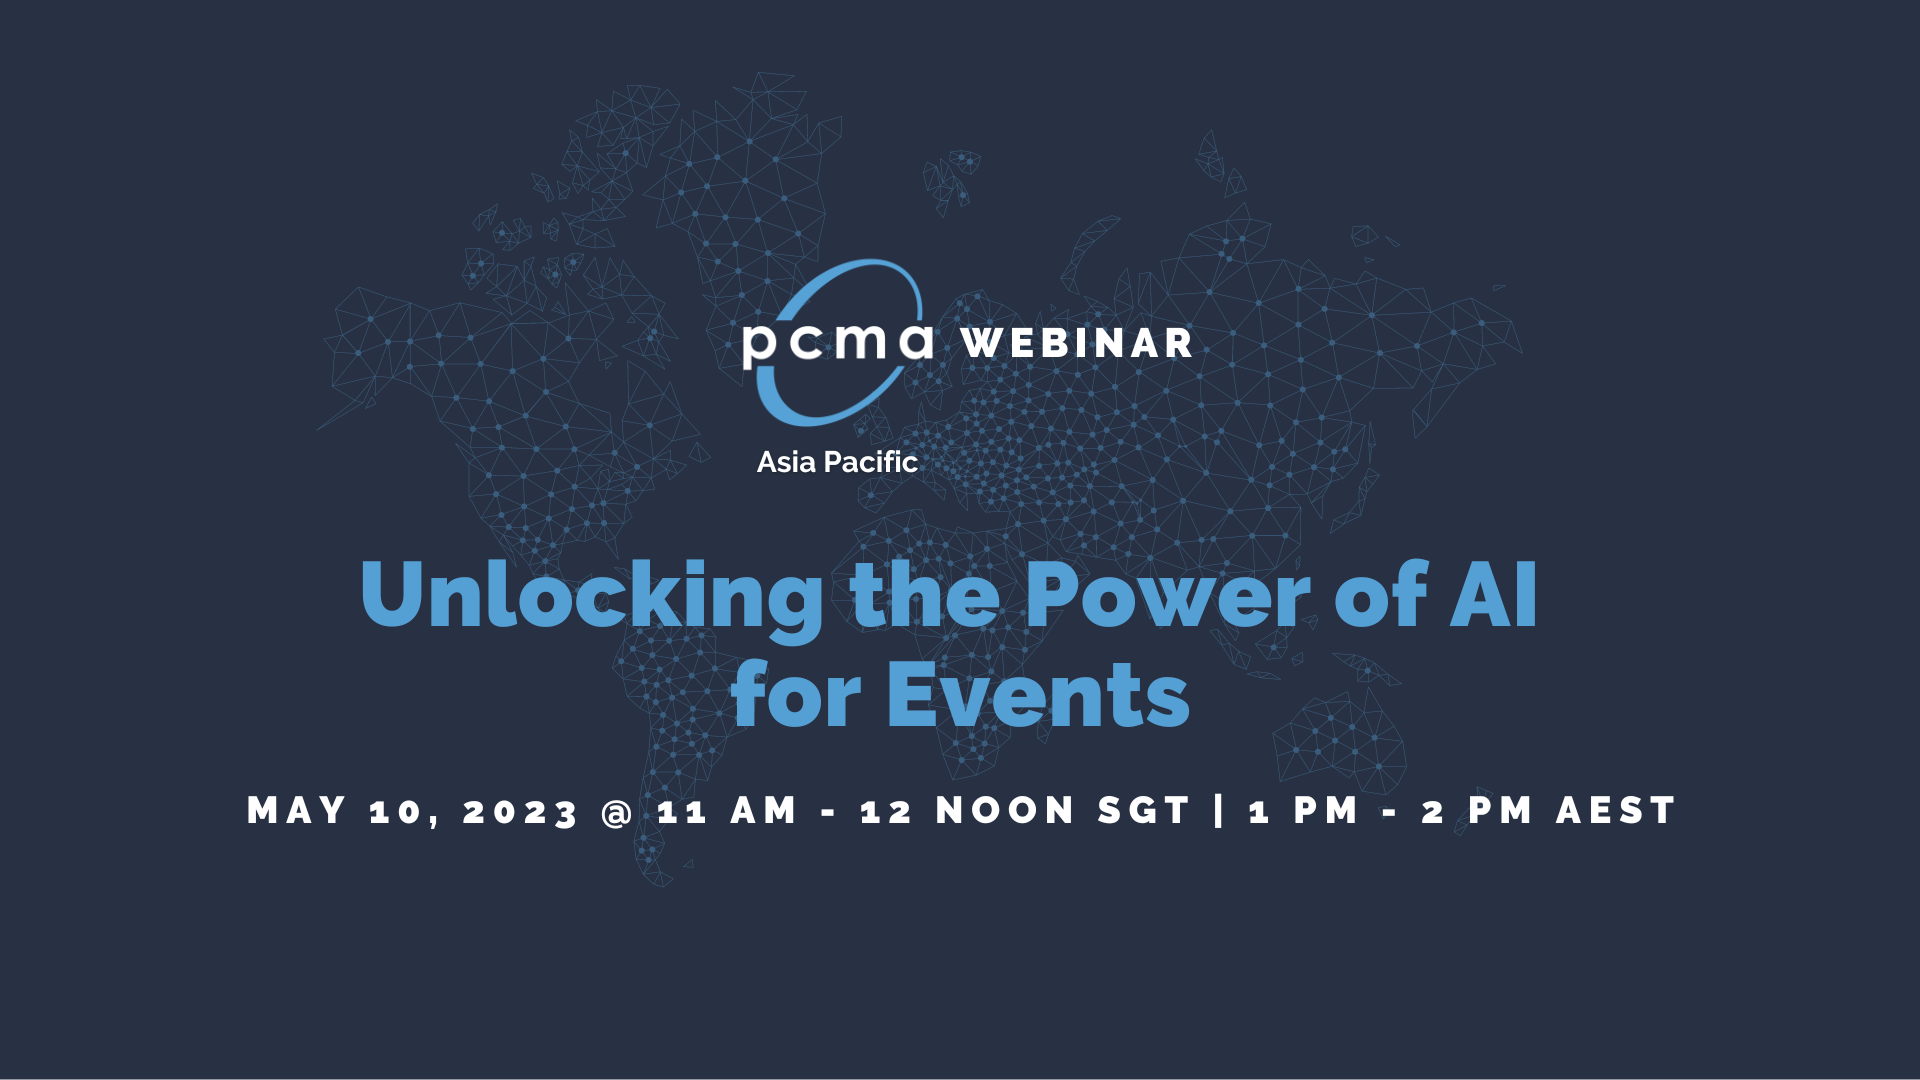 APAC Webinar - Unlocking the Power of AI for Events